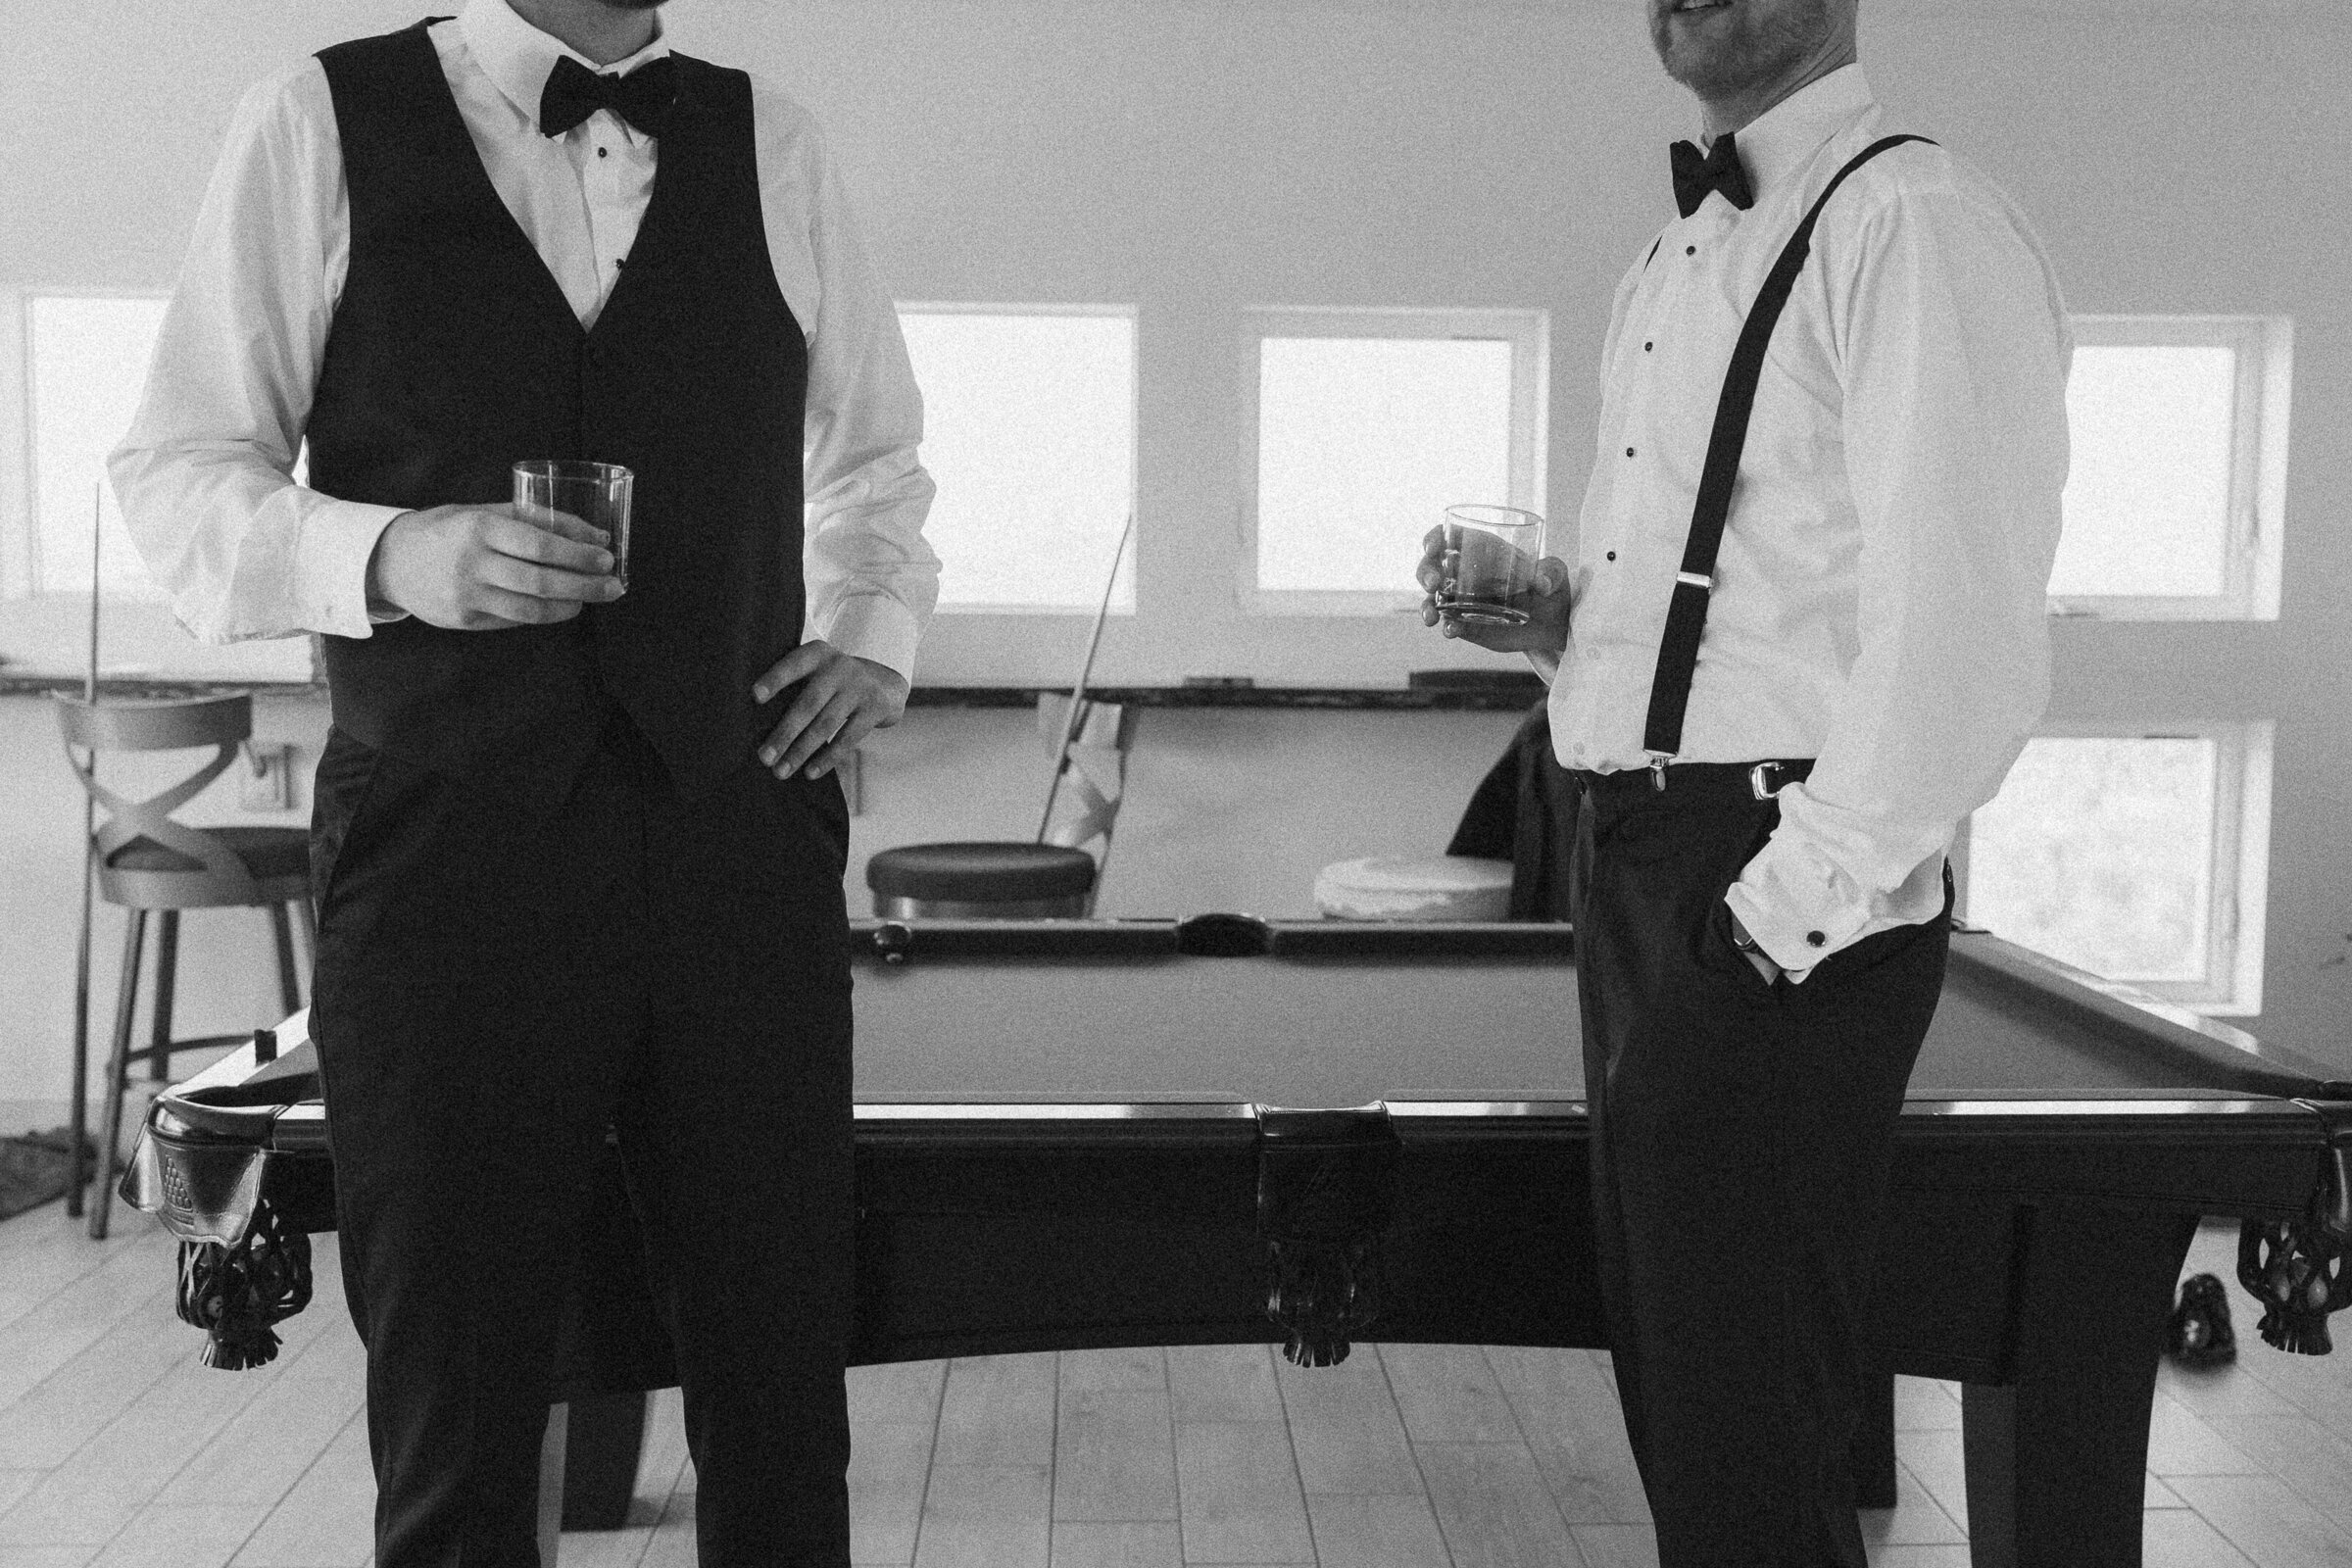 Two men in tuxedos with bow ties holding whiskey glasses near a pool table.